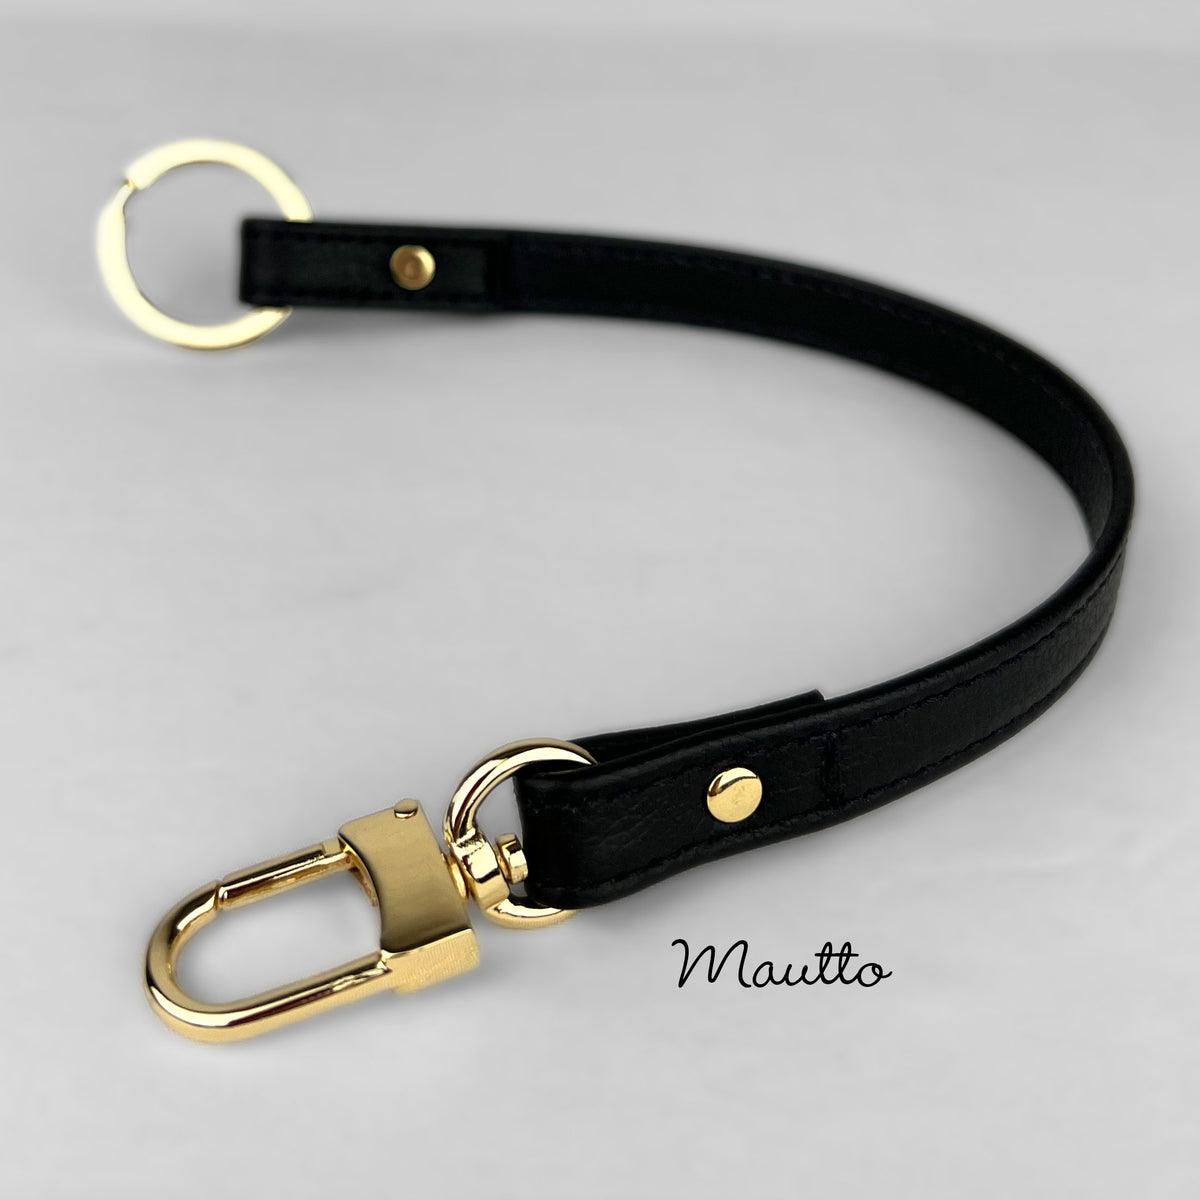 MauttoAccessories Leather Wrist Strap Accessory - Choose Leather Color and Clip Style - 1/2 inch Wide - Hand Made in The USA